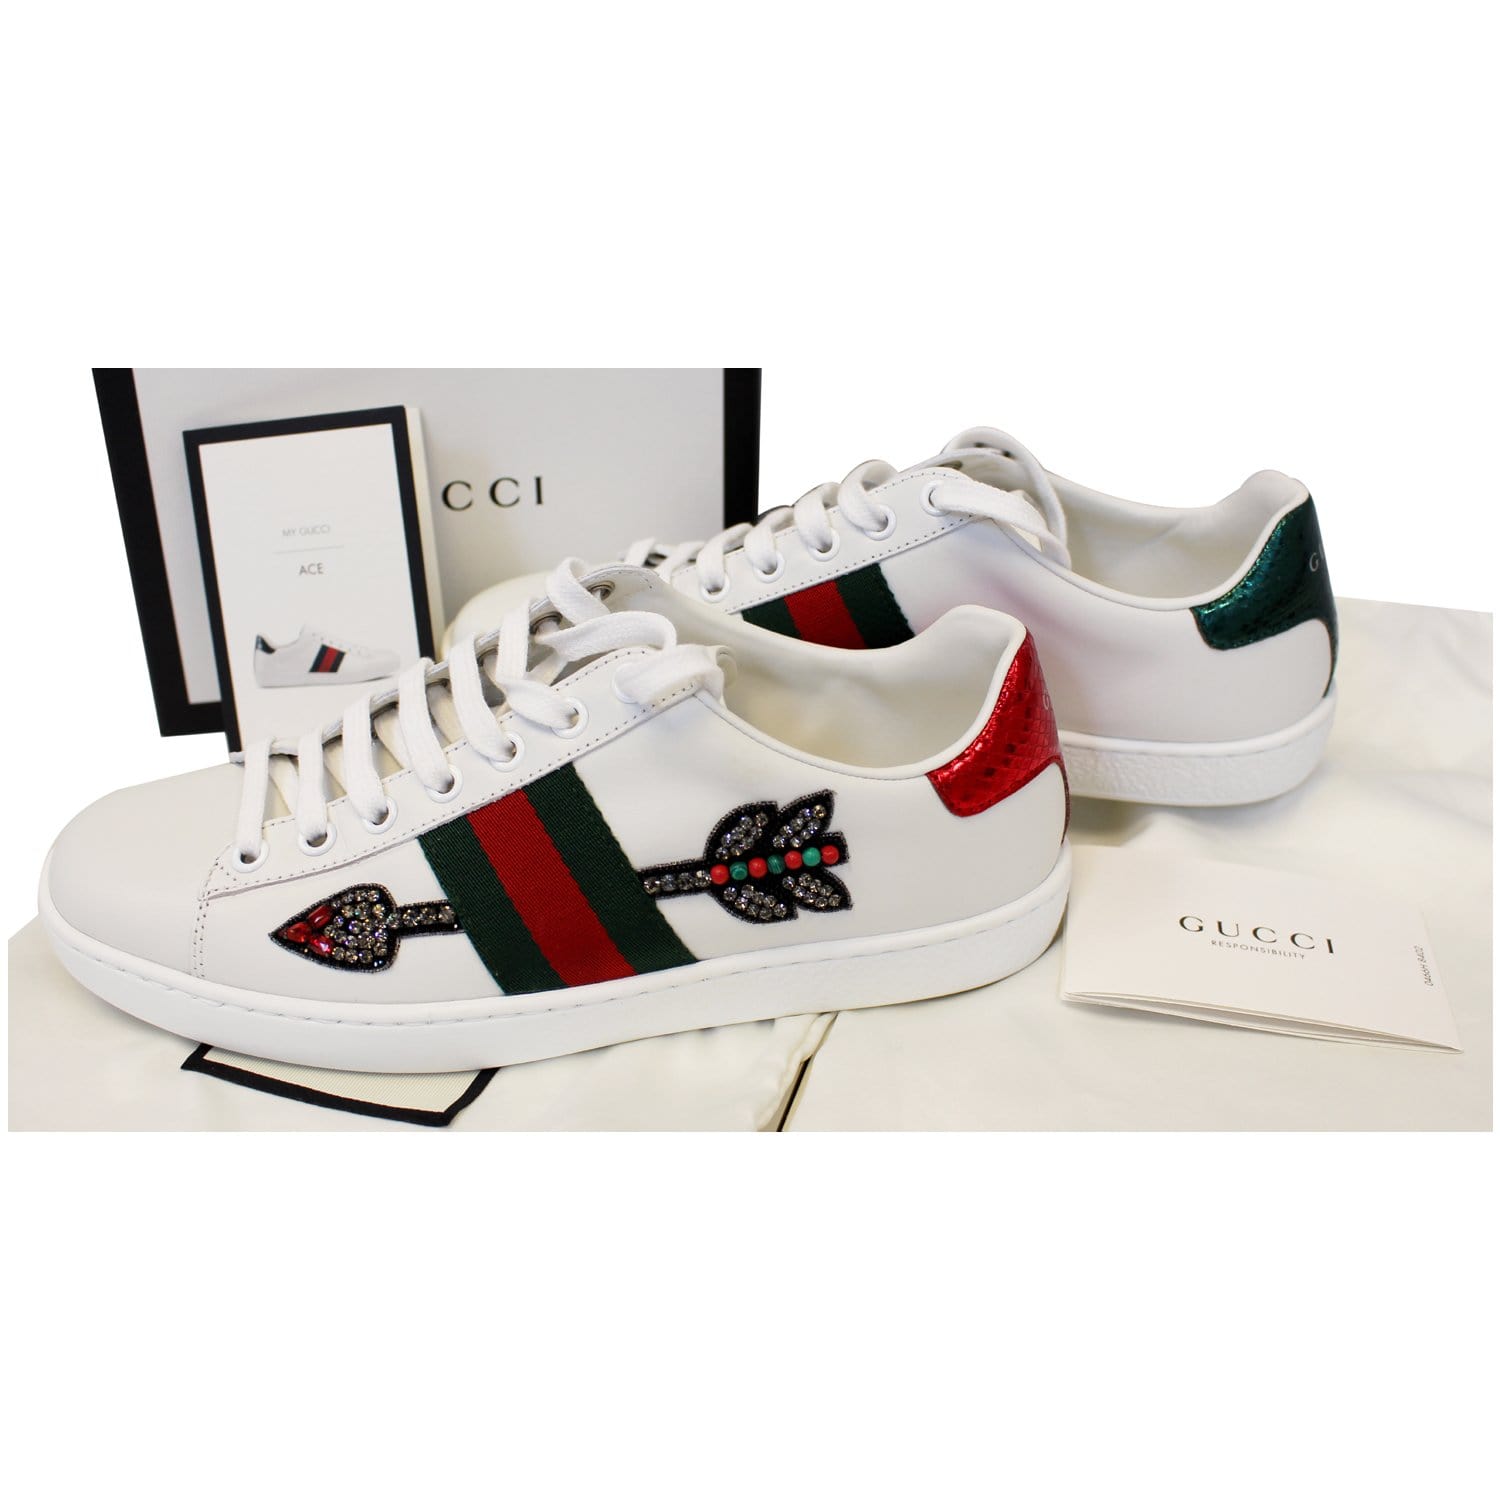 GUCCI Embroidered Arrow Logo Sneakers Size US 7.5-US